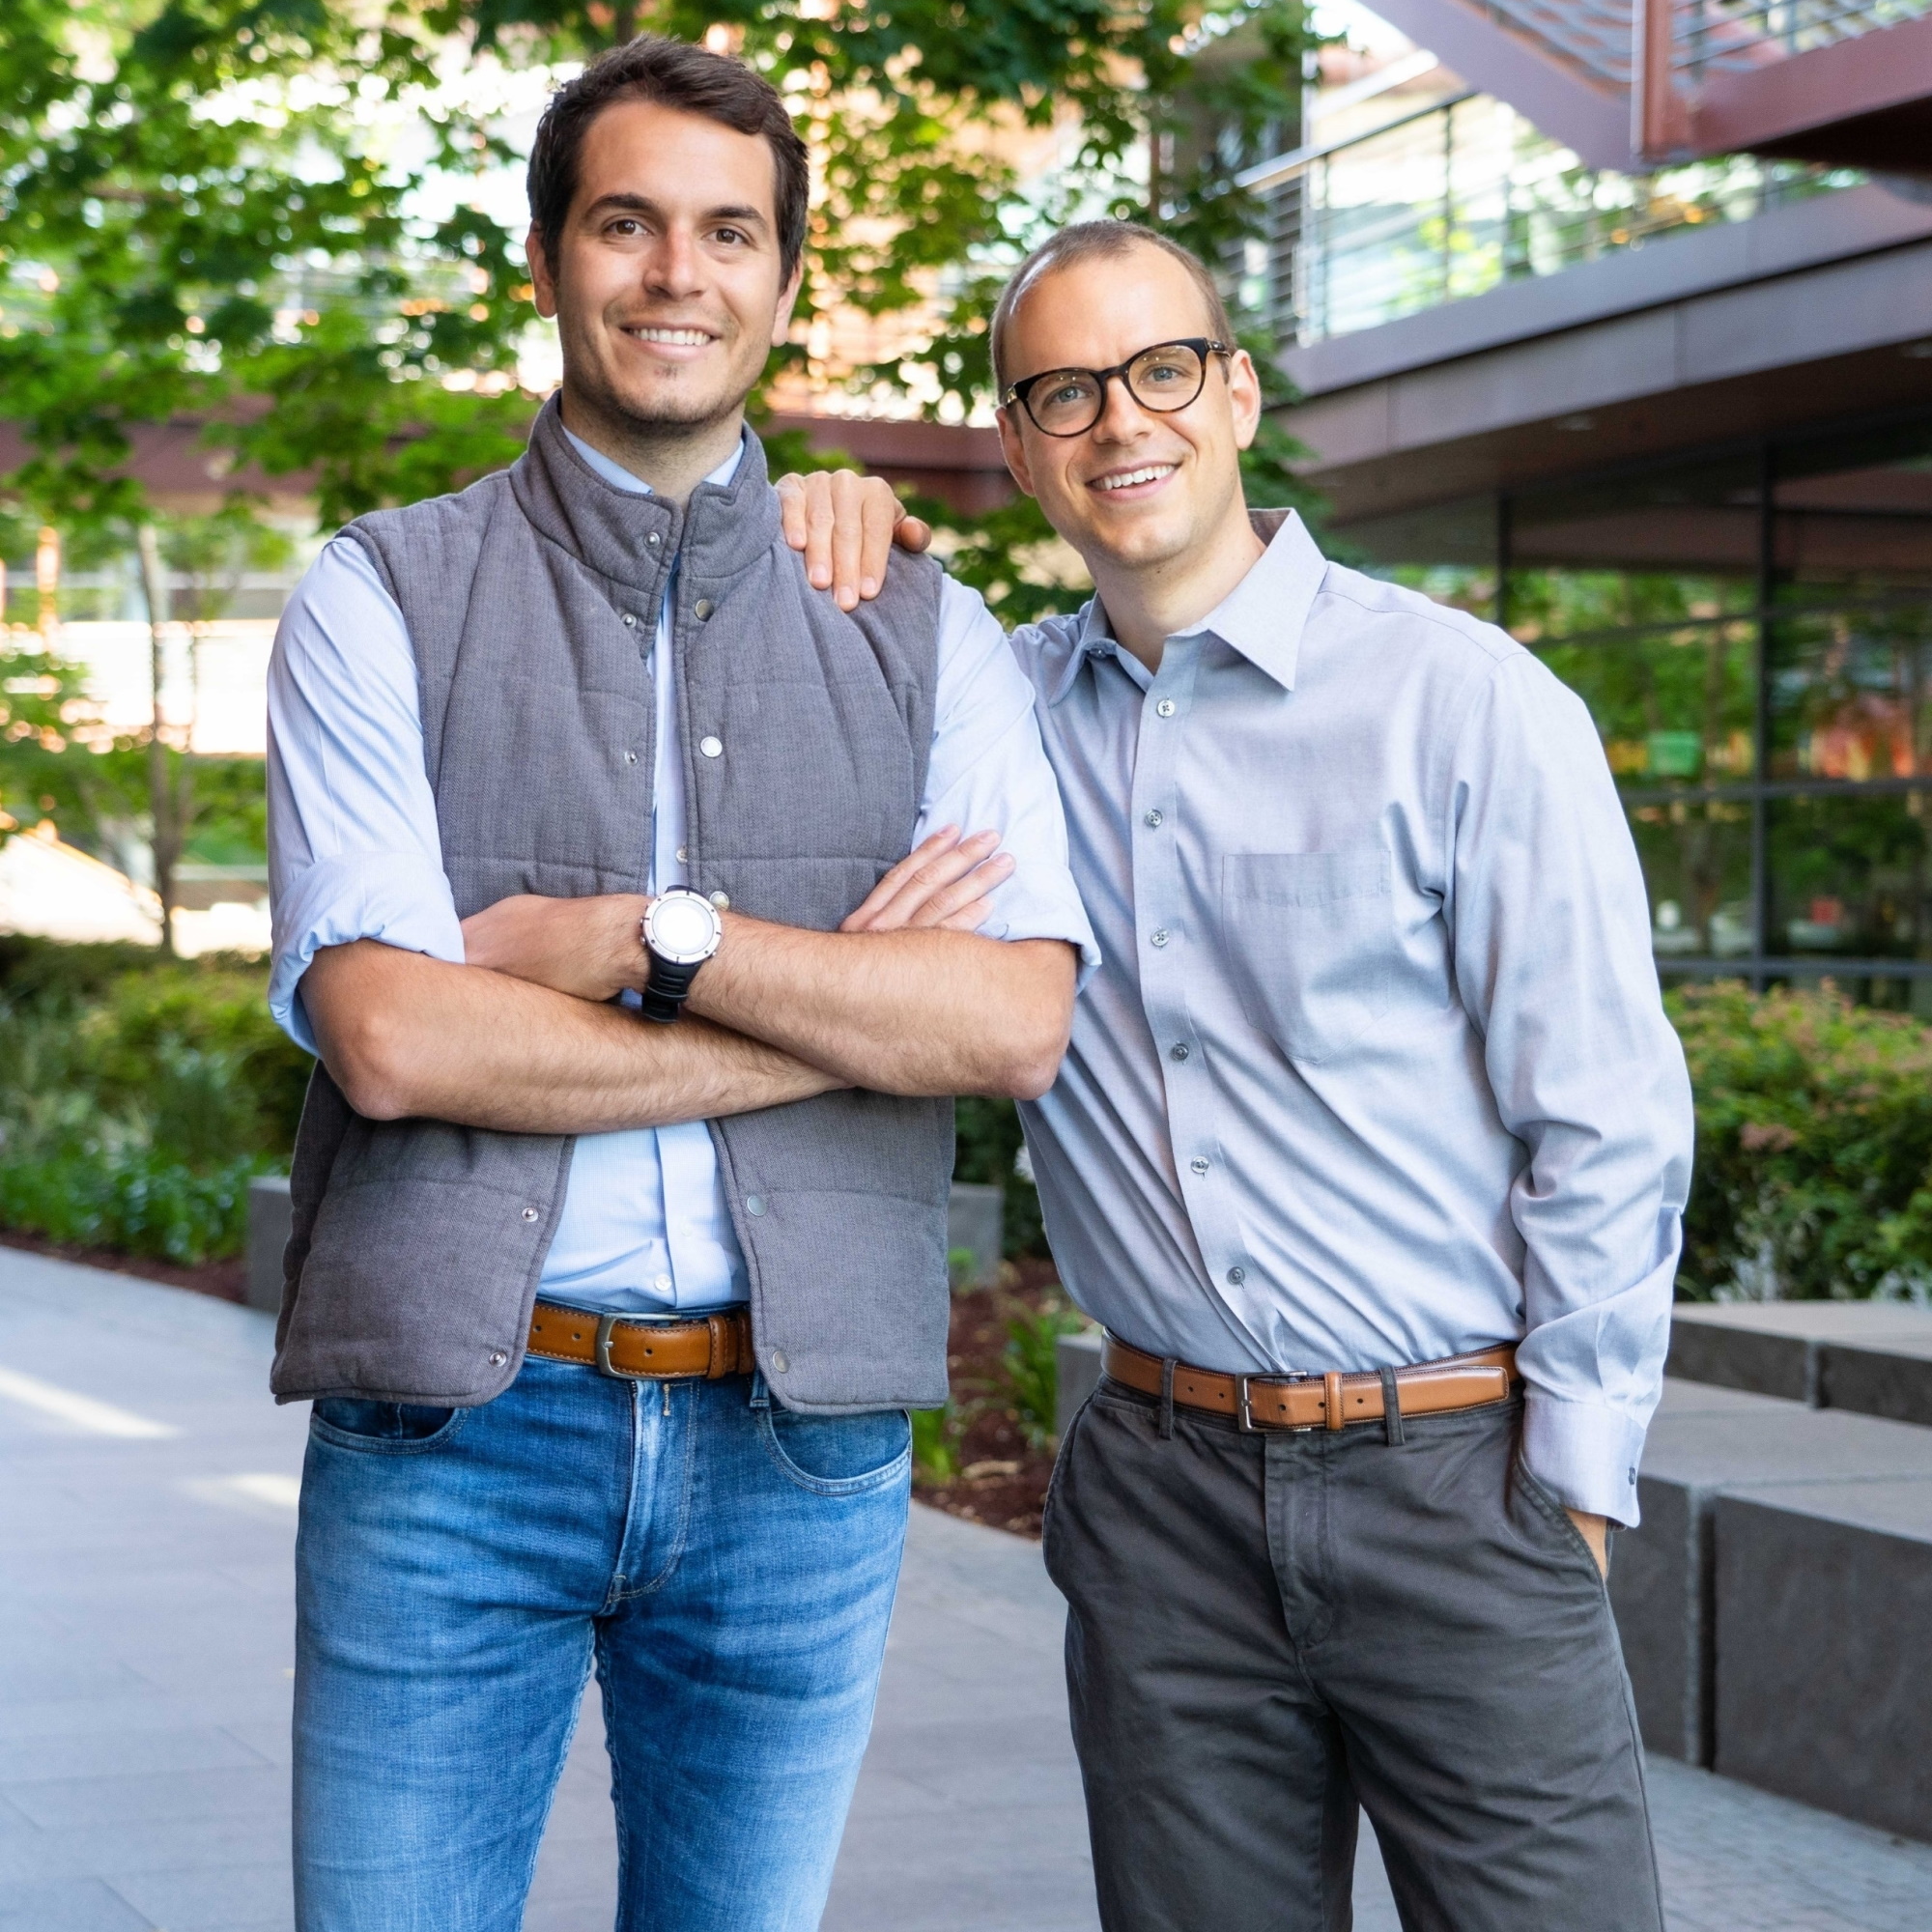 Orestis Vardoulis, left, and Urs Naber, co-founders of Zeit, pose with each other in a courtyard.